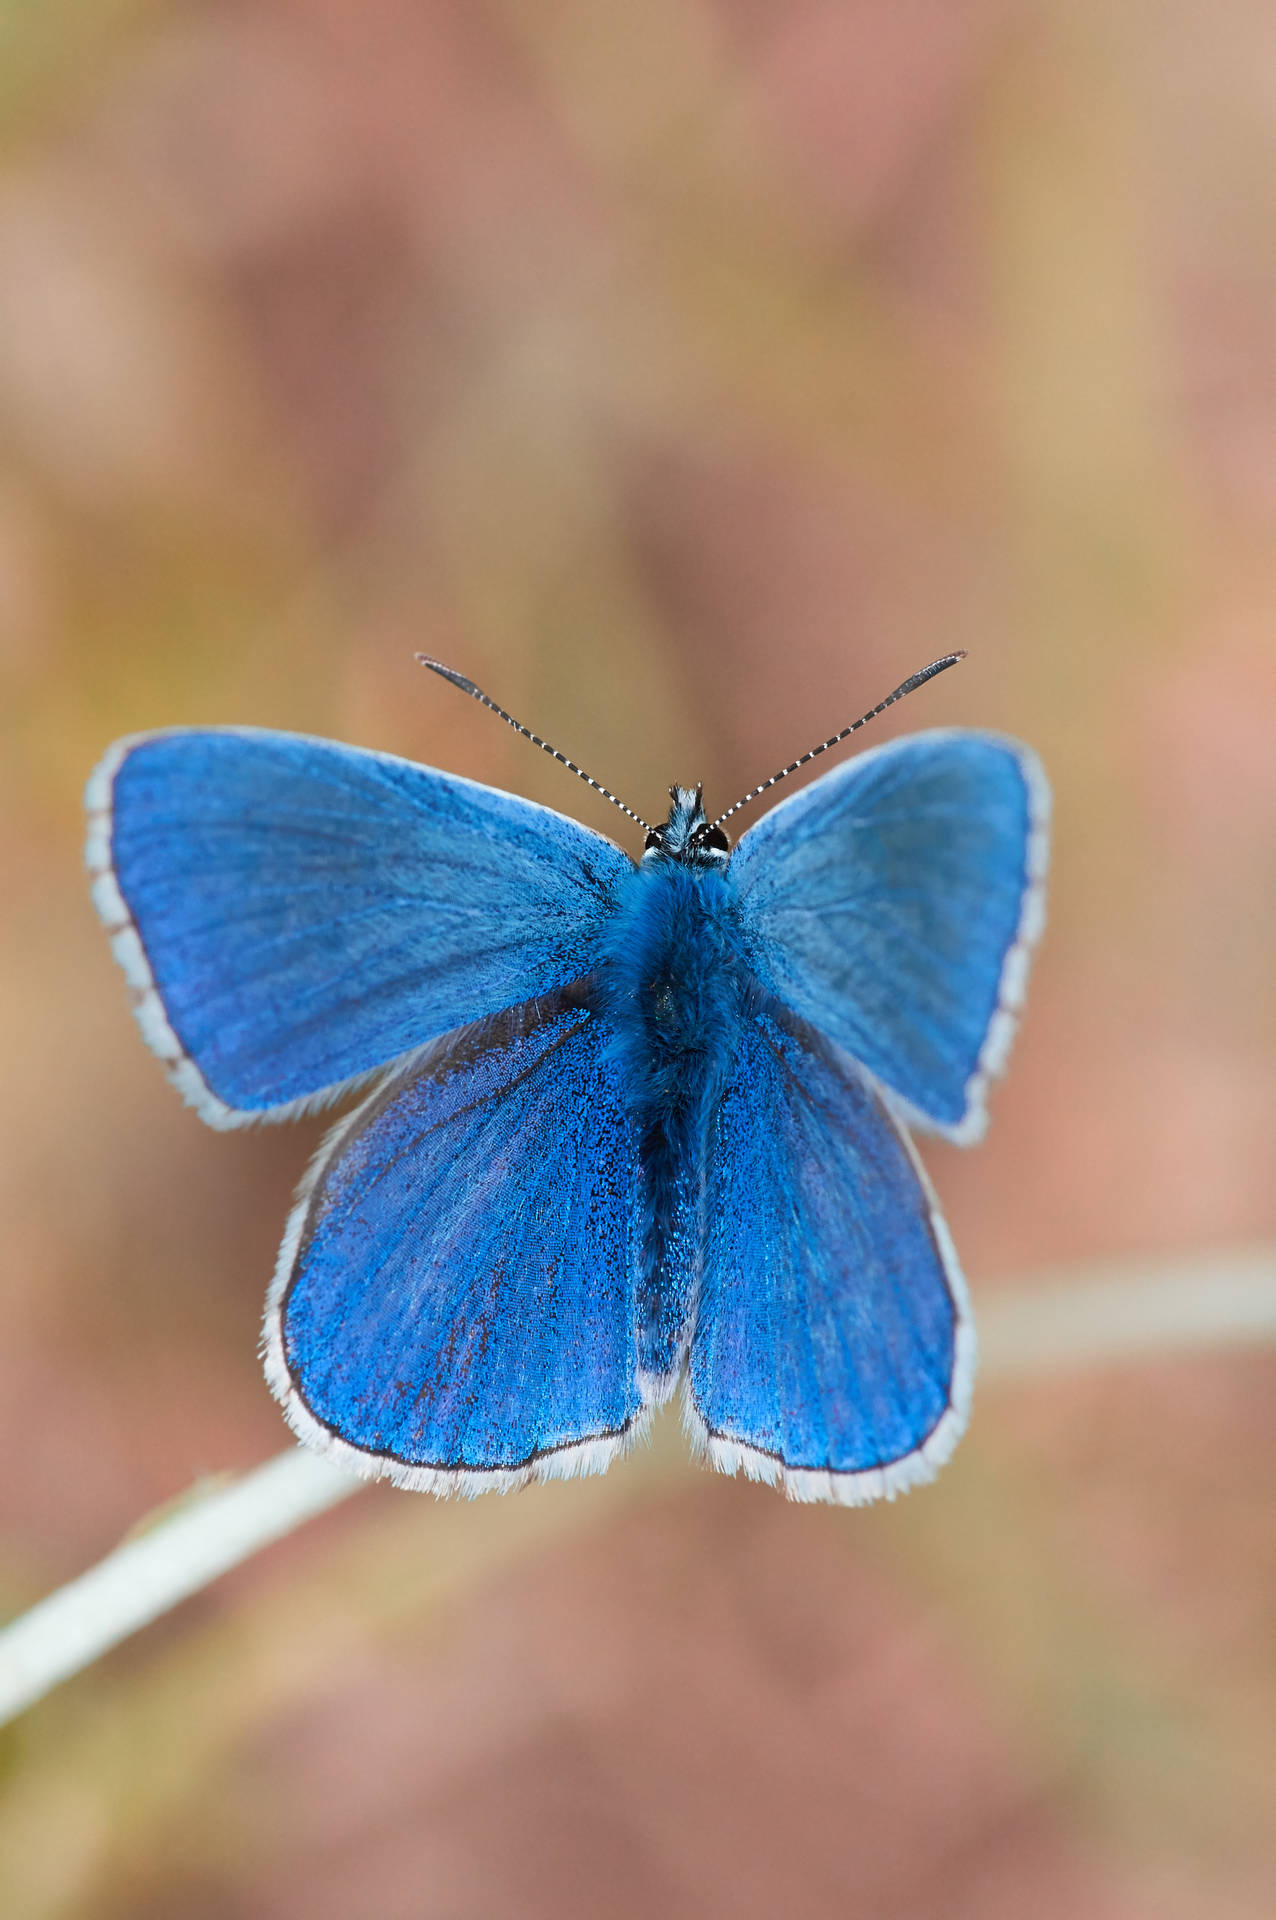 Blue Butterfly 3264X4912 Wallpaper and Background Image